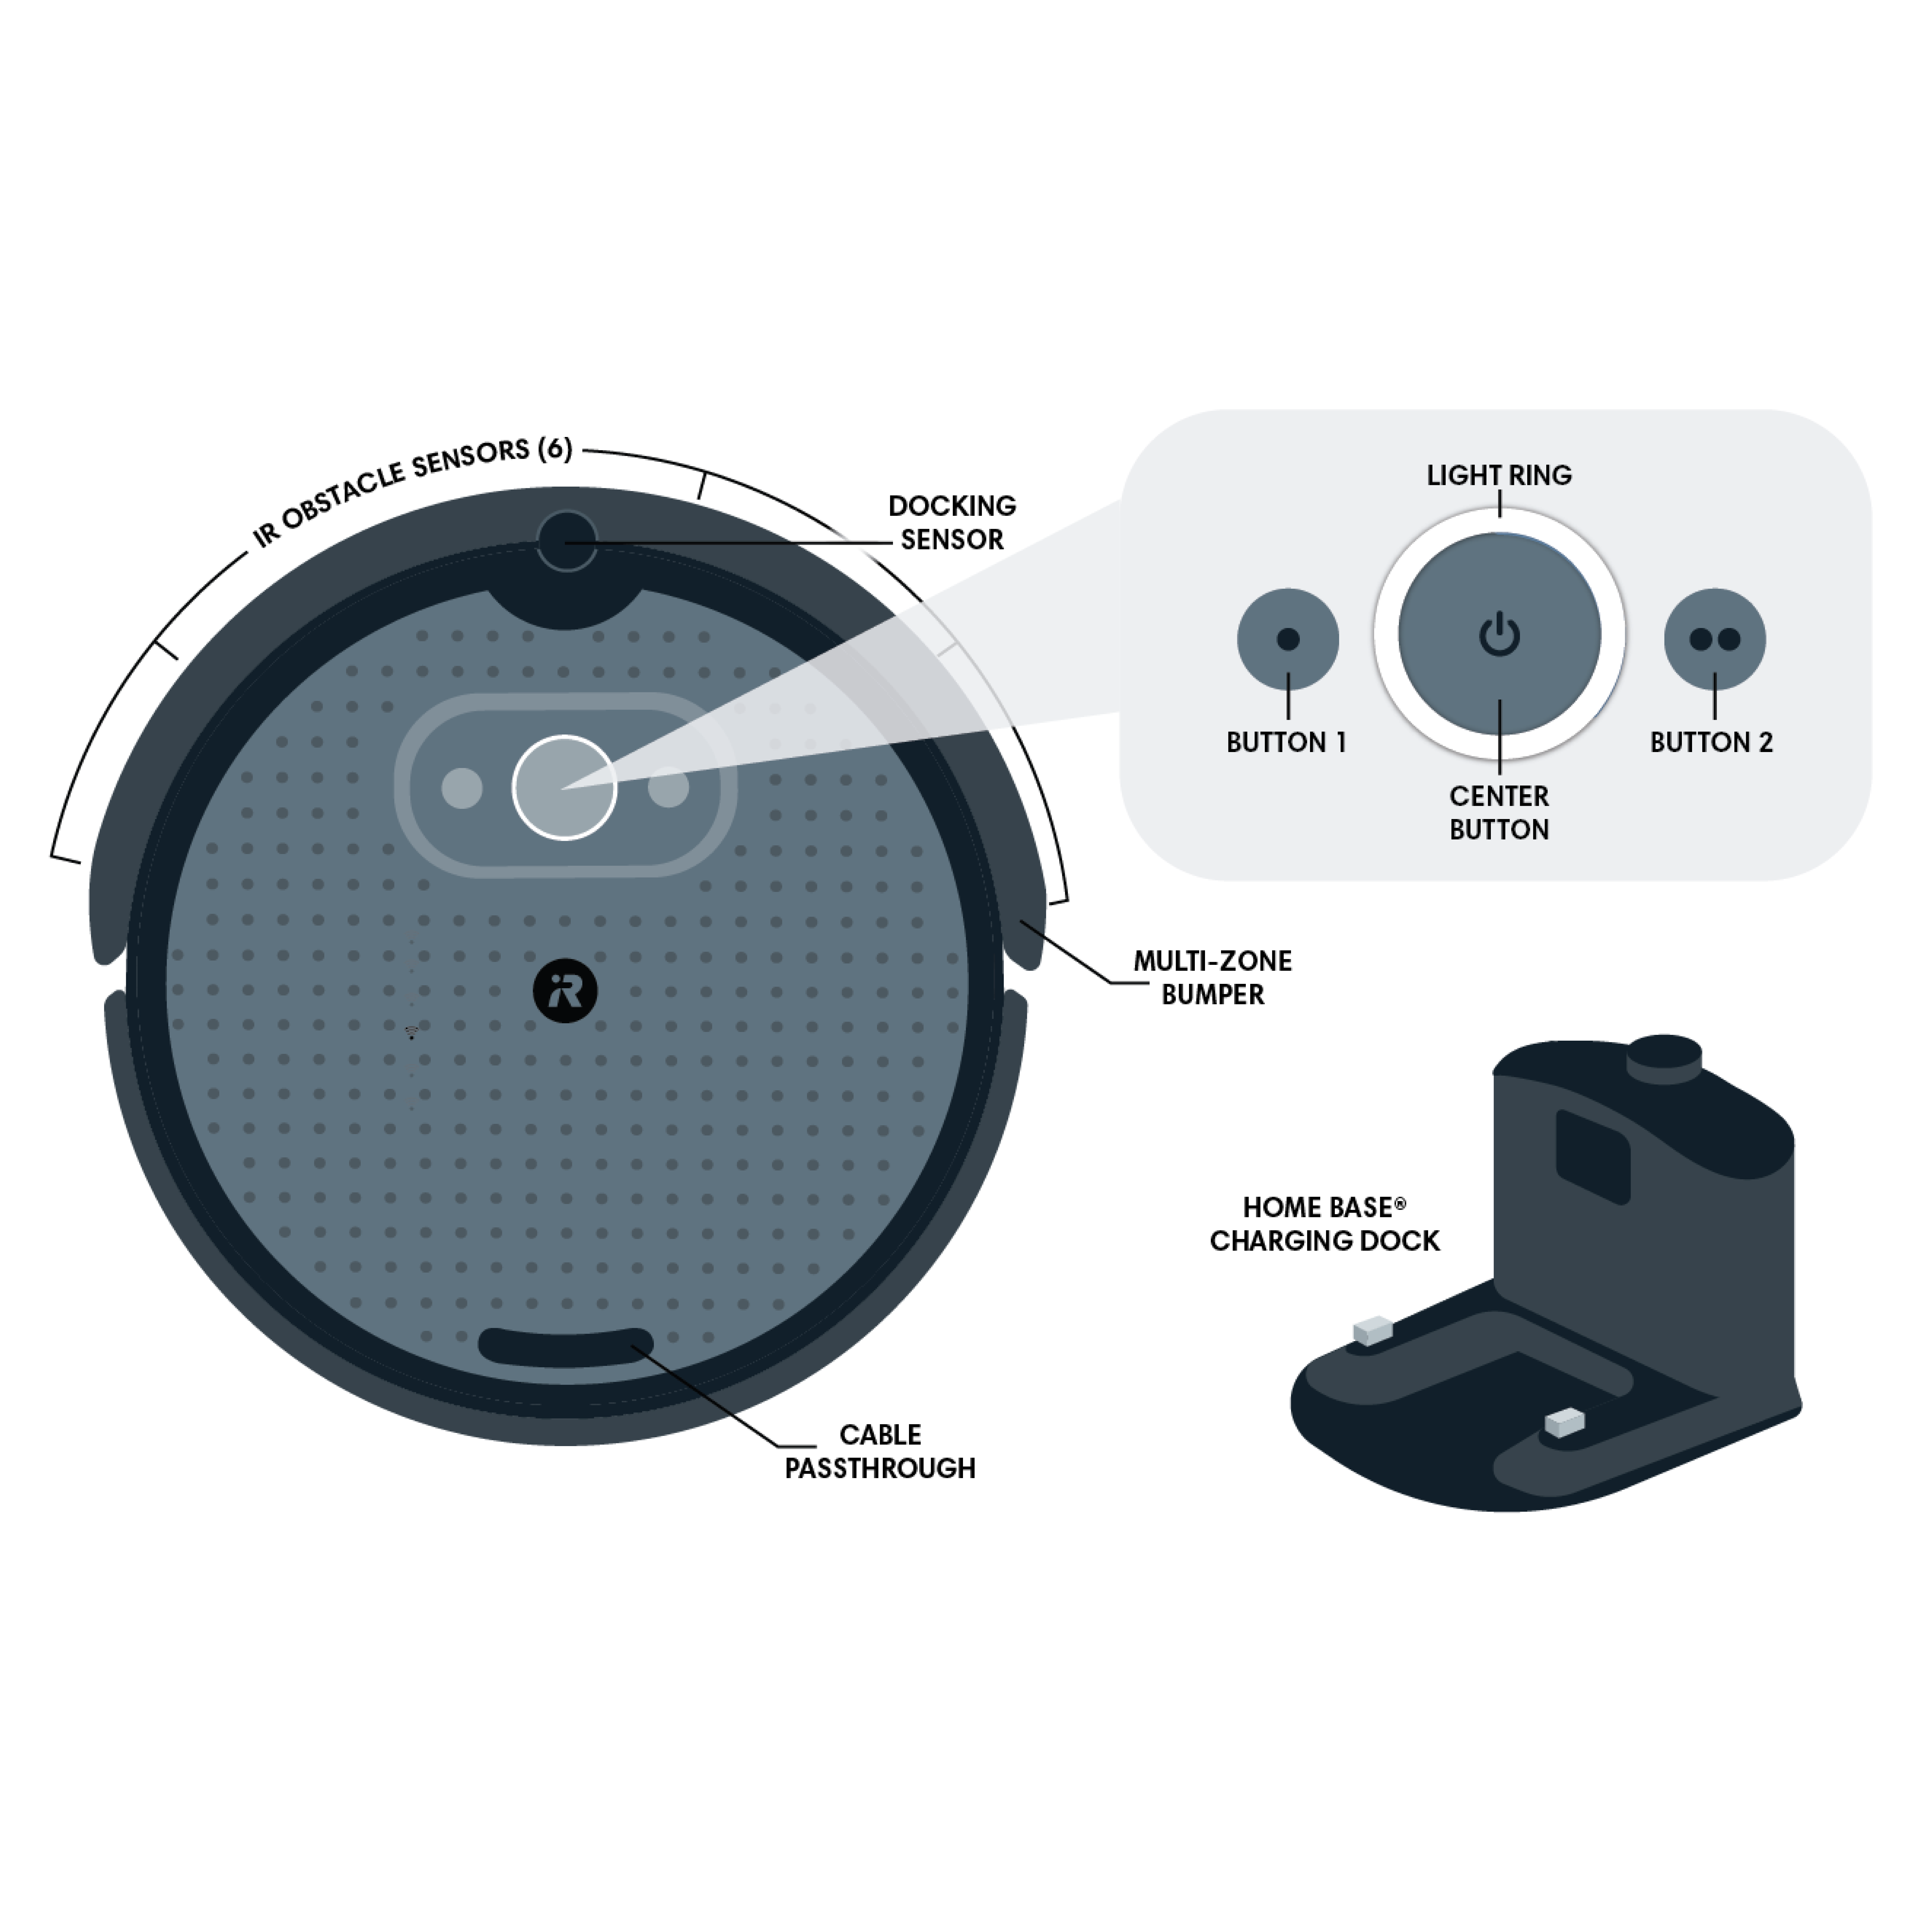 How to Charge Roomba Without Home Base: A Step-by-Step Guide